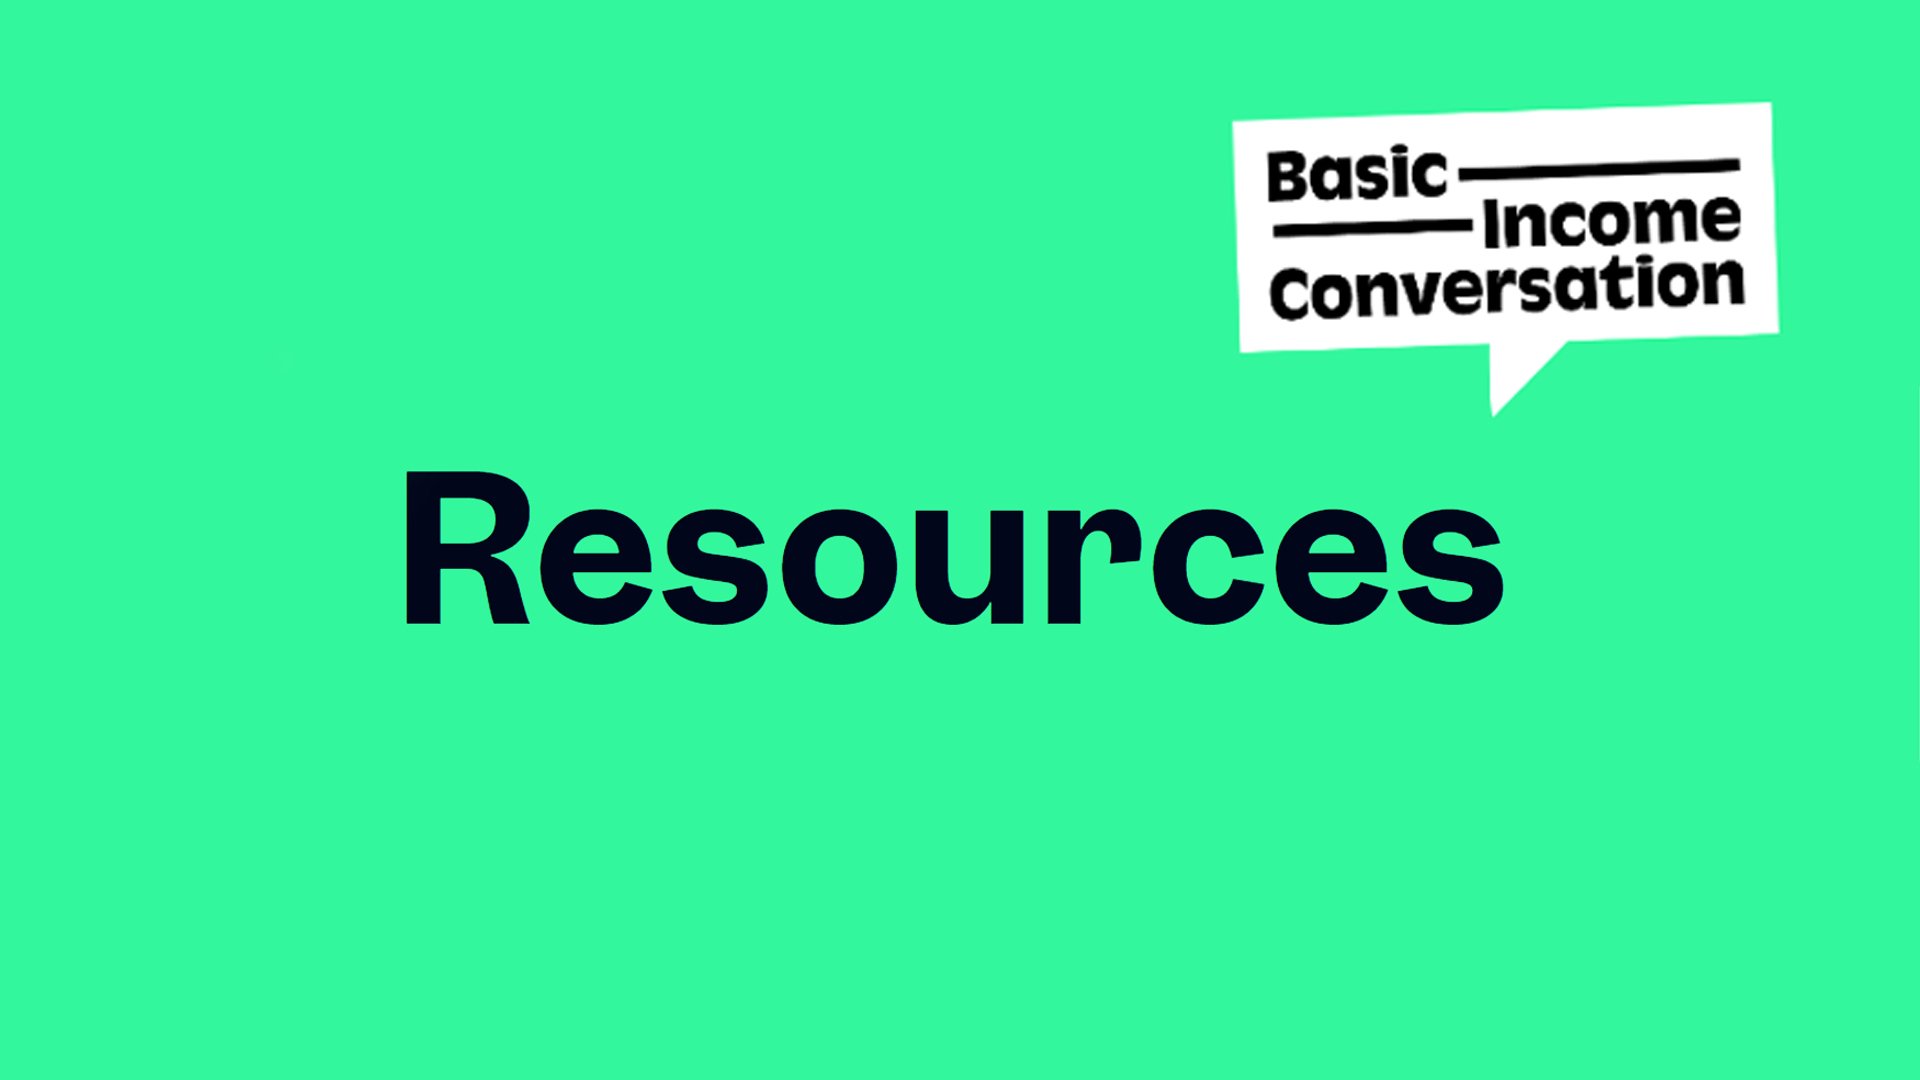 Basic Income Conversation resources